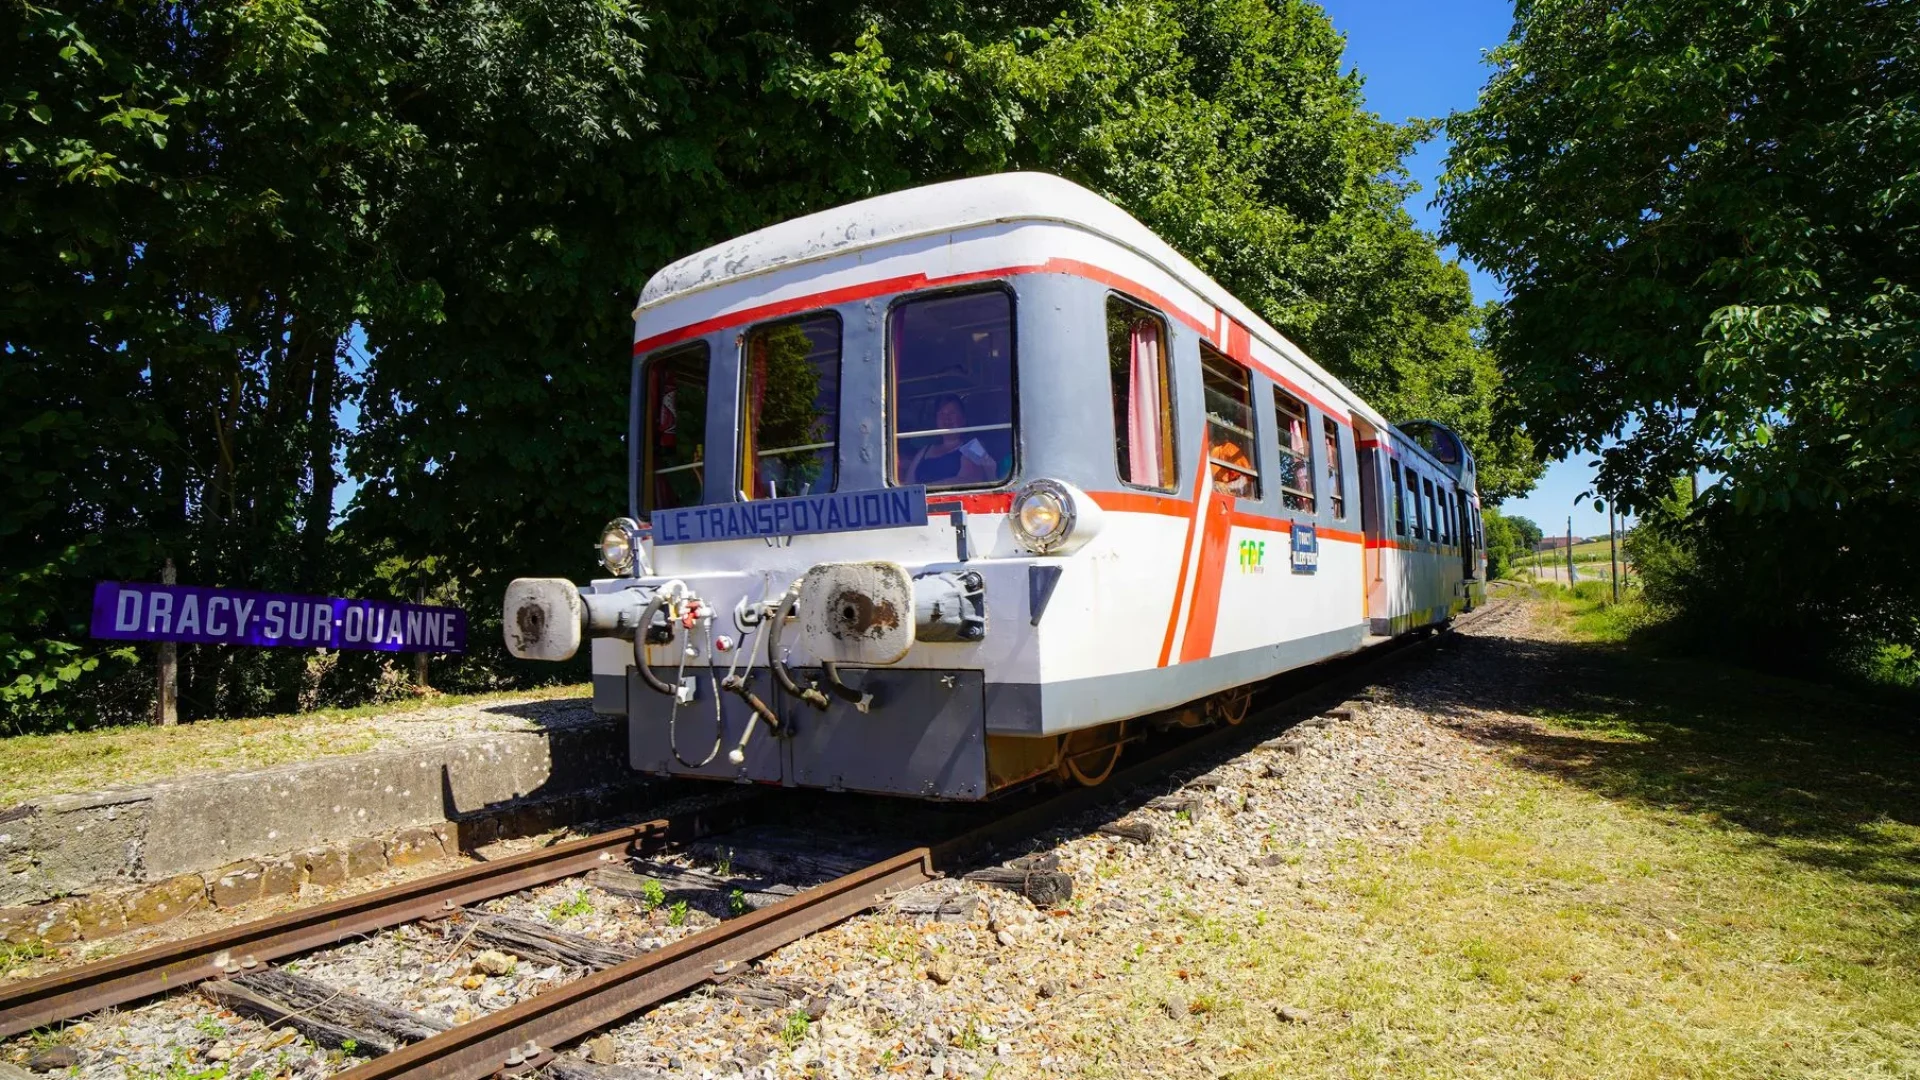 The tourist train arrives in Dracy